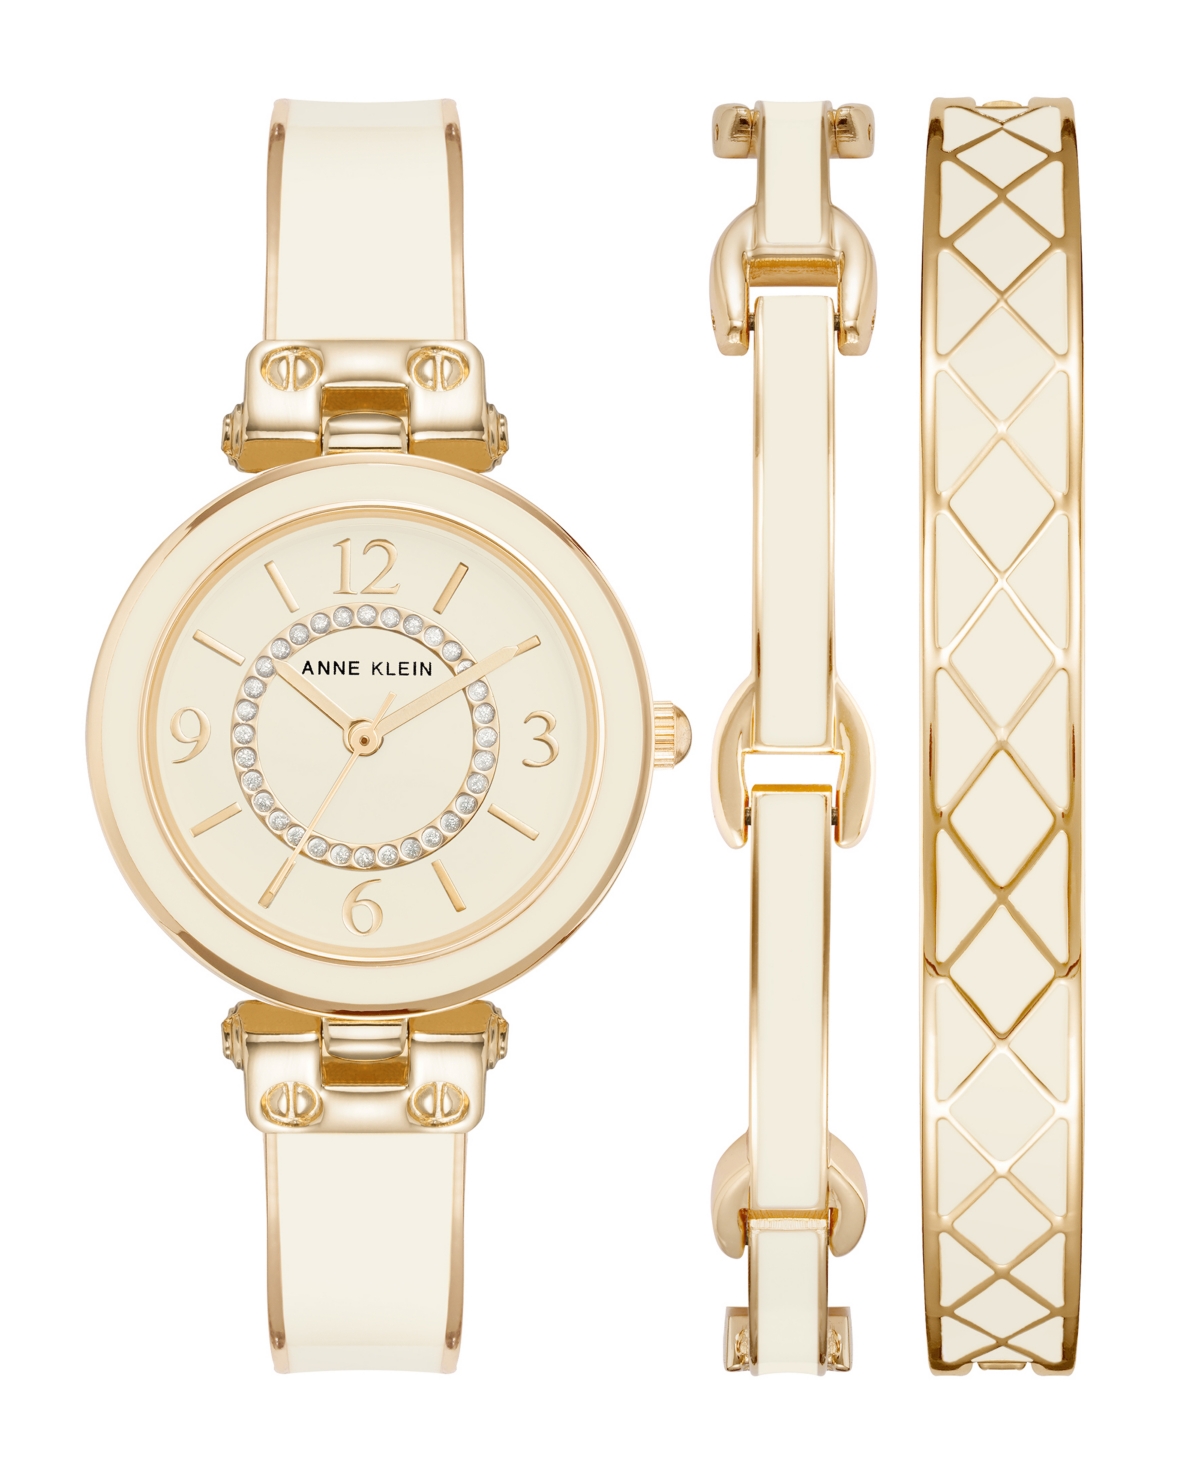 Anne Klein Women's Gold-tone Alloy Bangle With White Enamel And Crystal Accents Fashion Watch 33mm Set 3 Pieces In Gold-tone,white